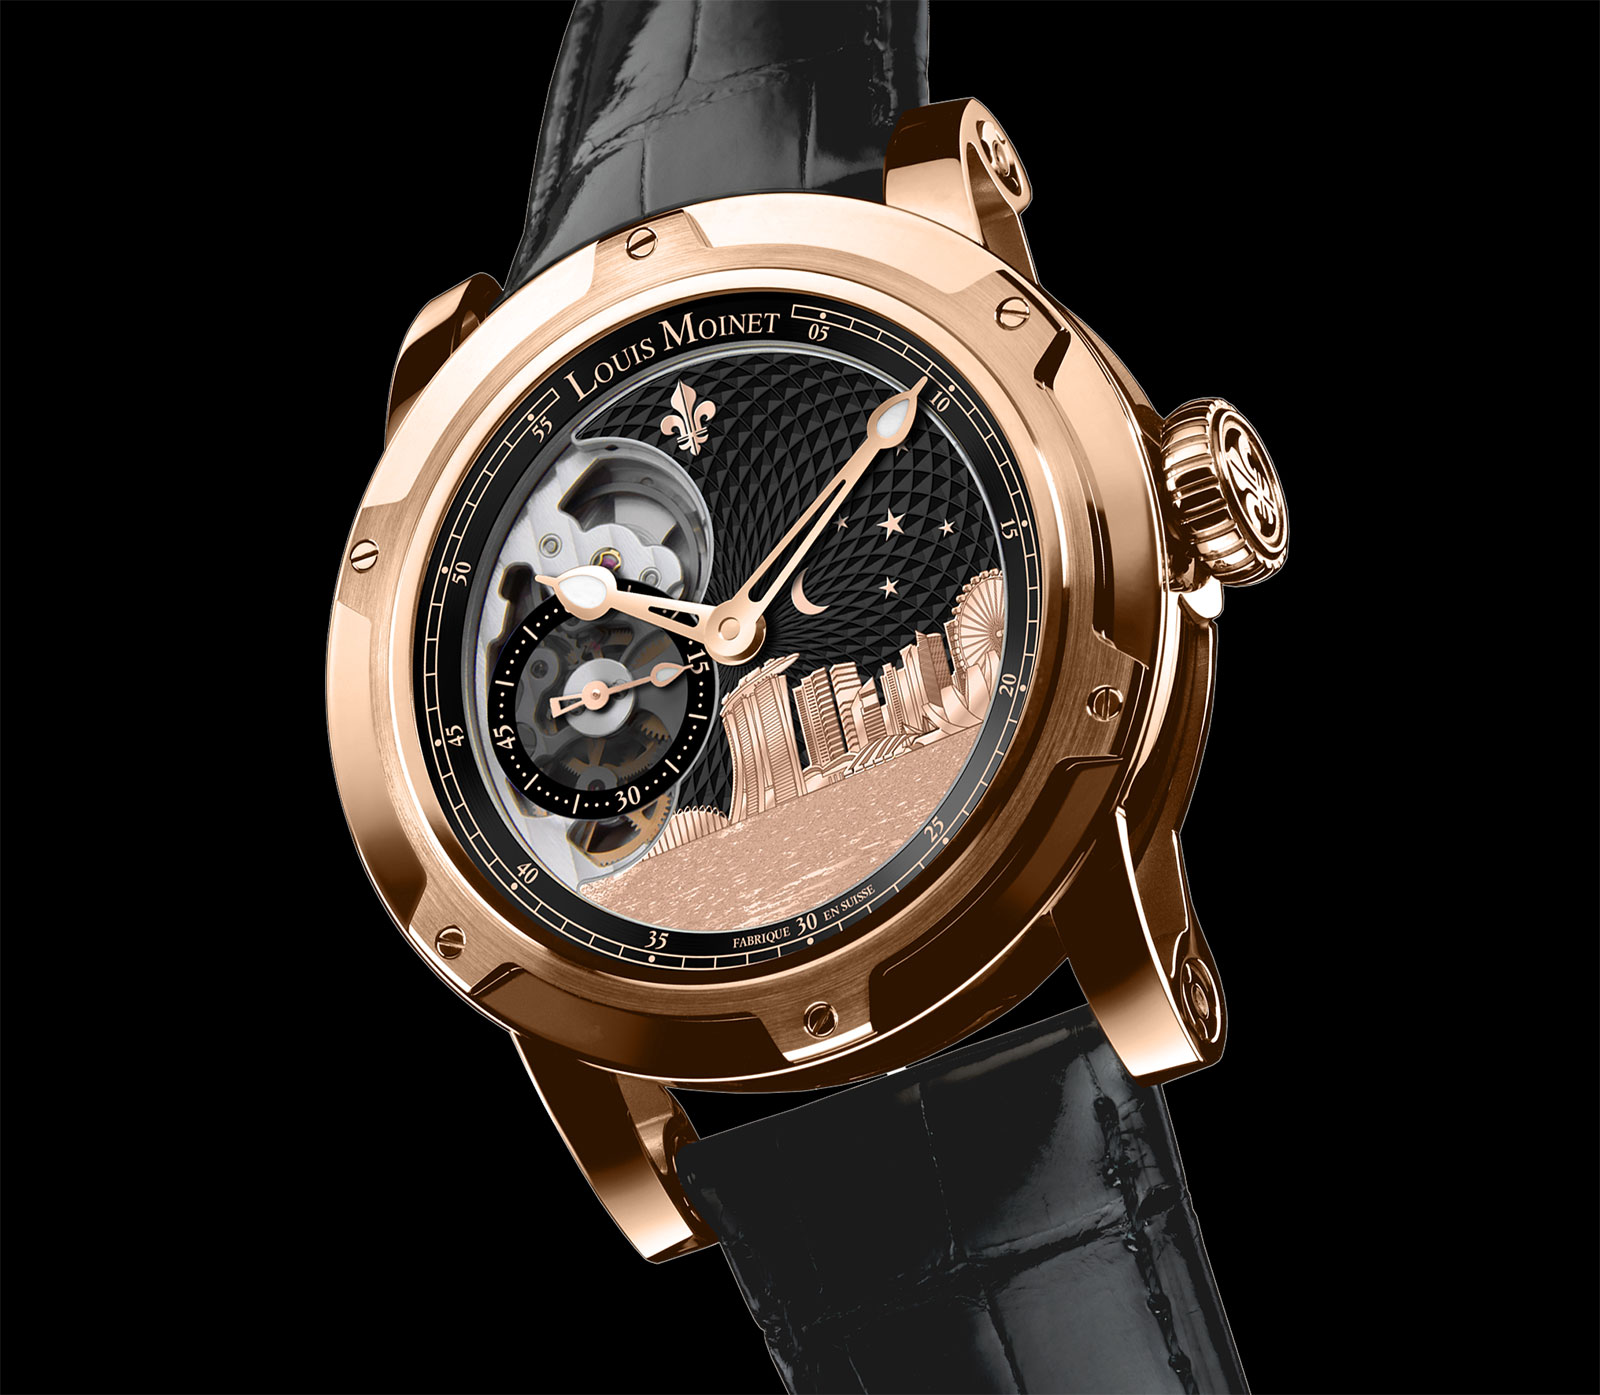 Louis Moinet Introduces the Singapore Edition | SJX Watches